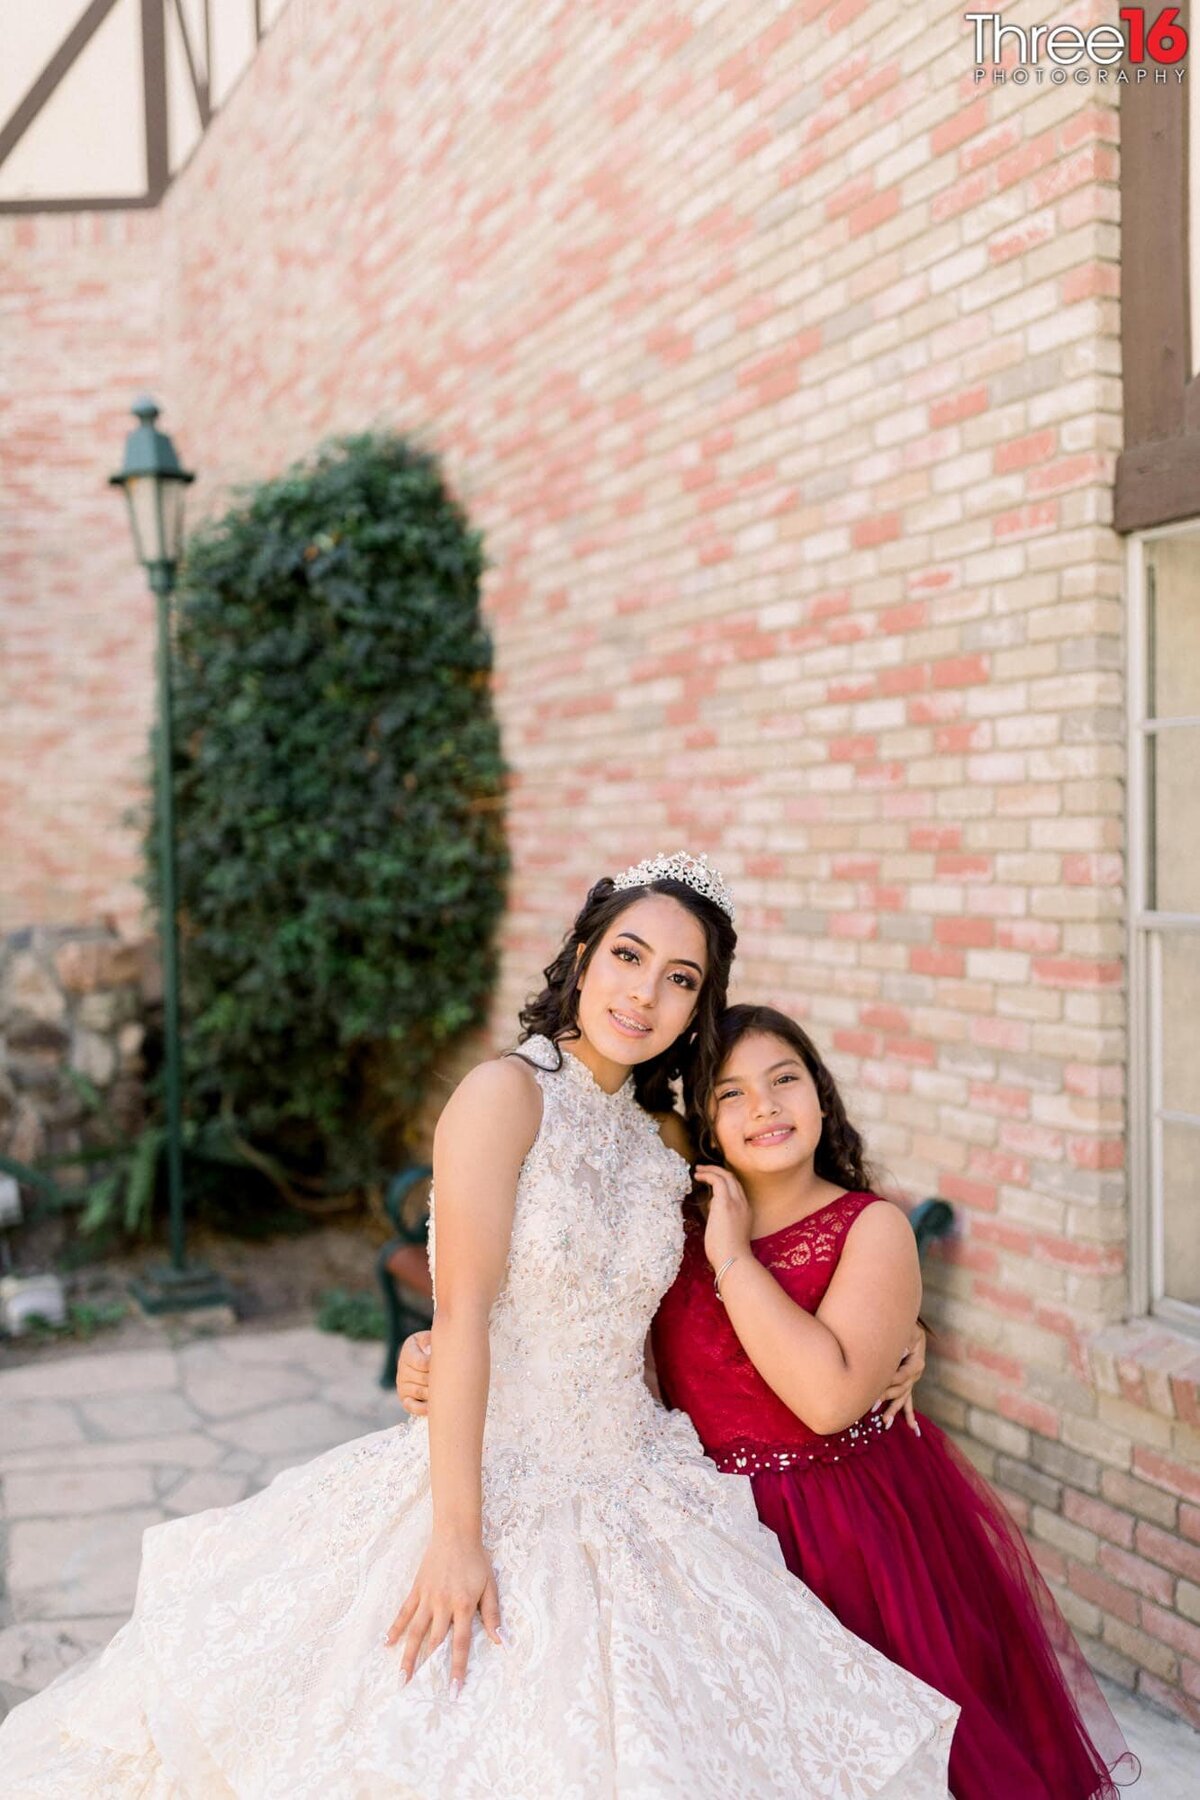 Young girl poses with the teen girl while celebrating her quinceanera